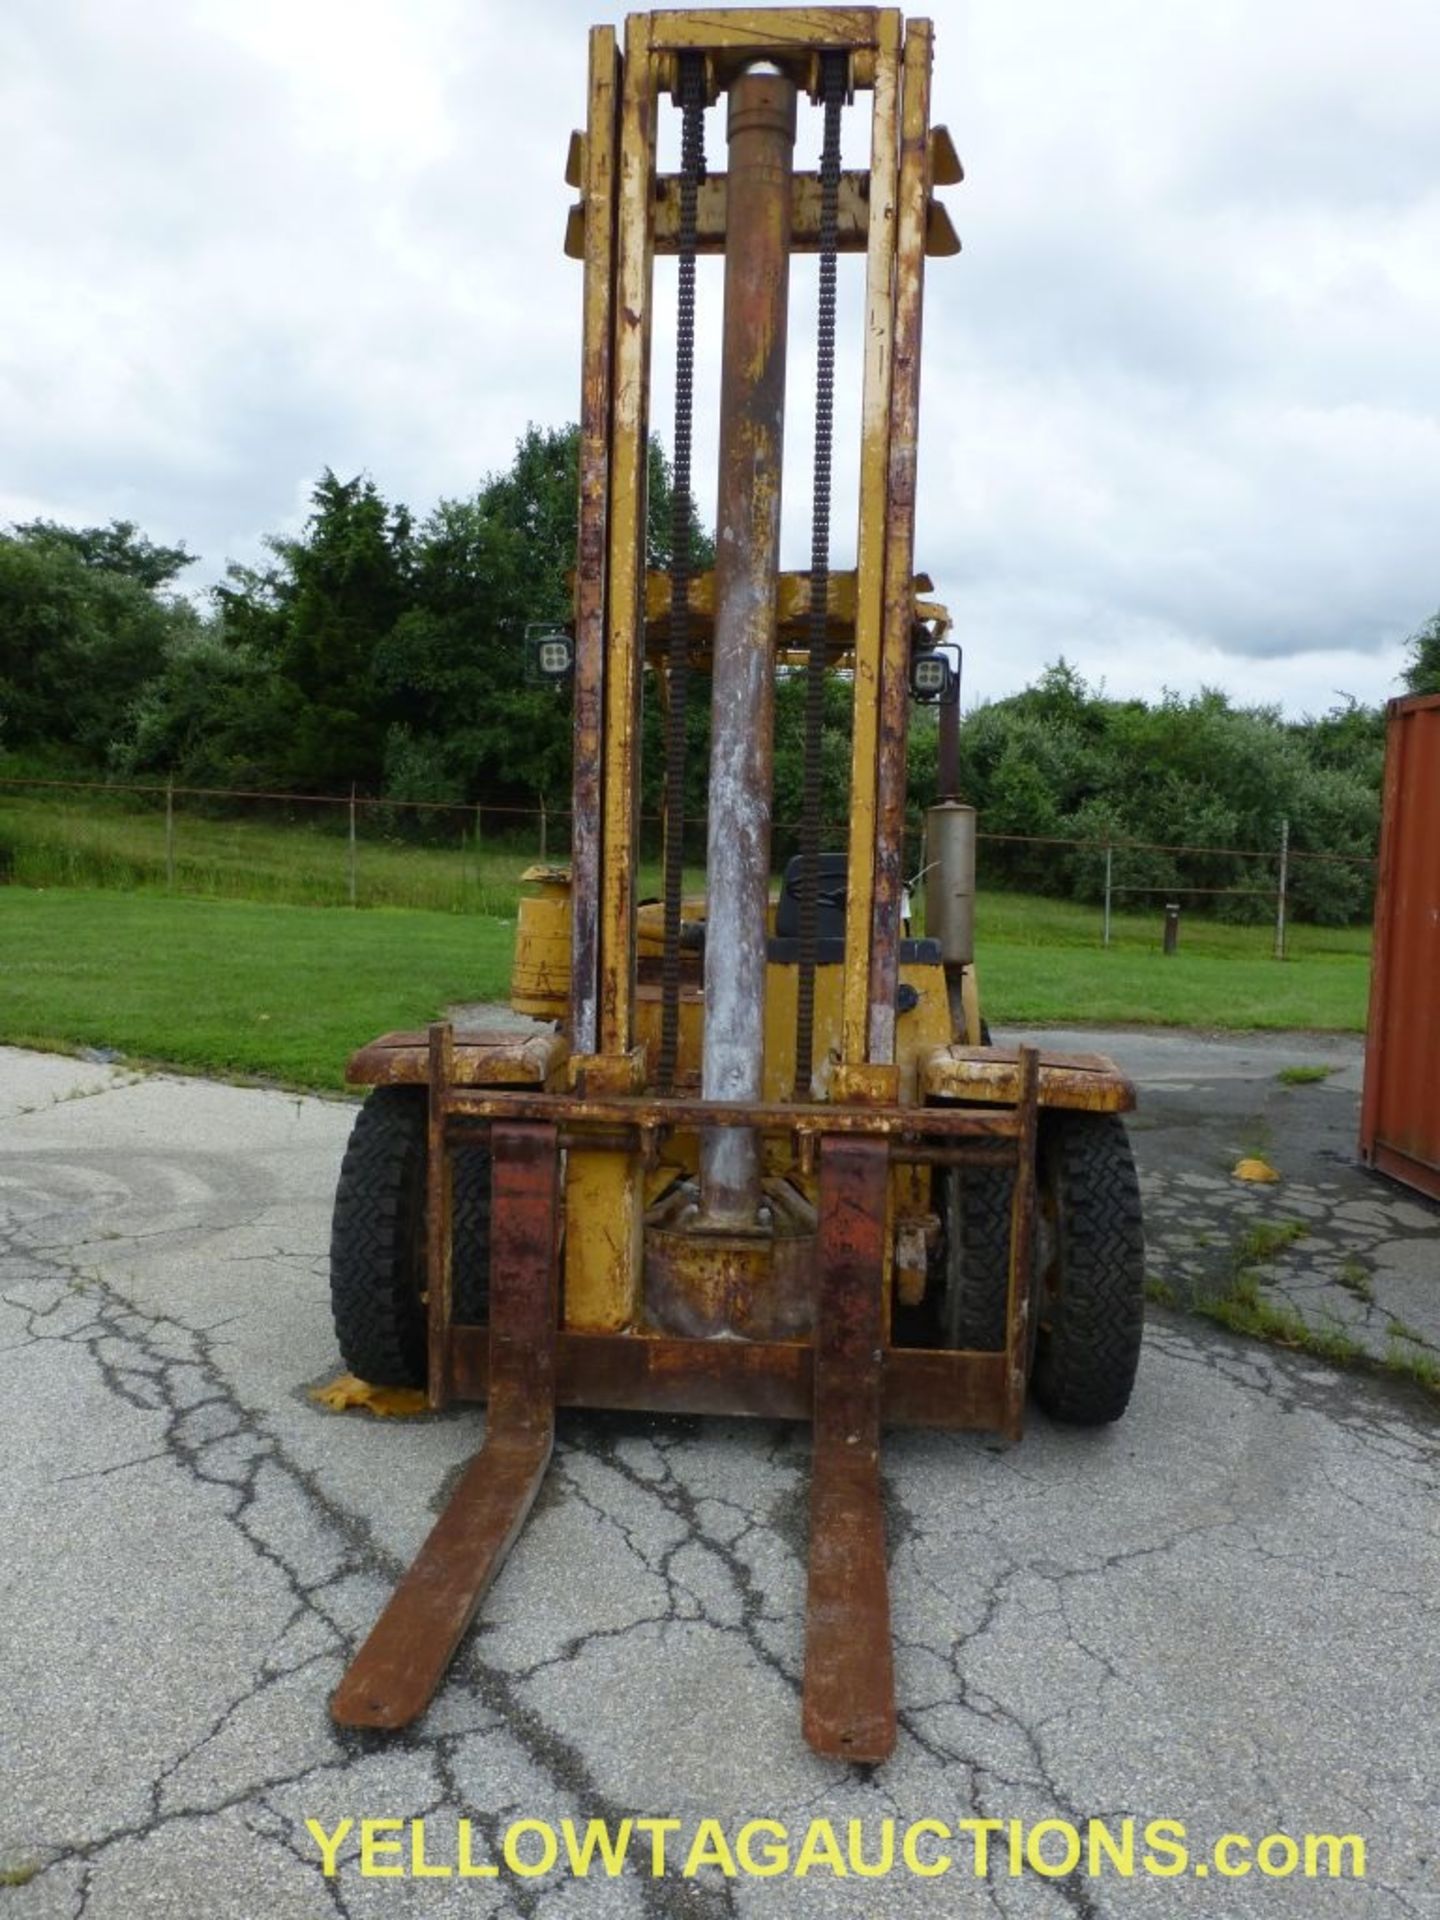 Hyster Diesel Forklift - 48" Fork Length; Mast Height: 156"; Max Capacity: 15,000 lbs - Image 2 of 22